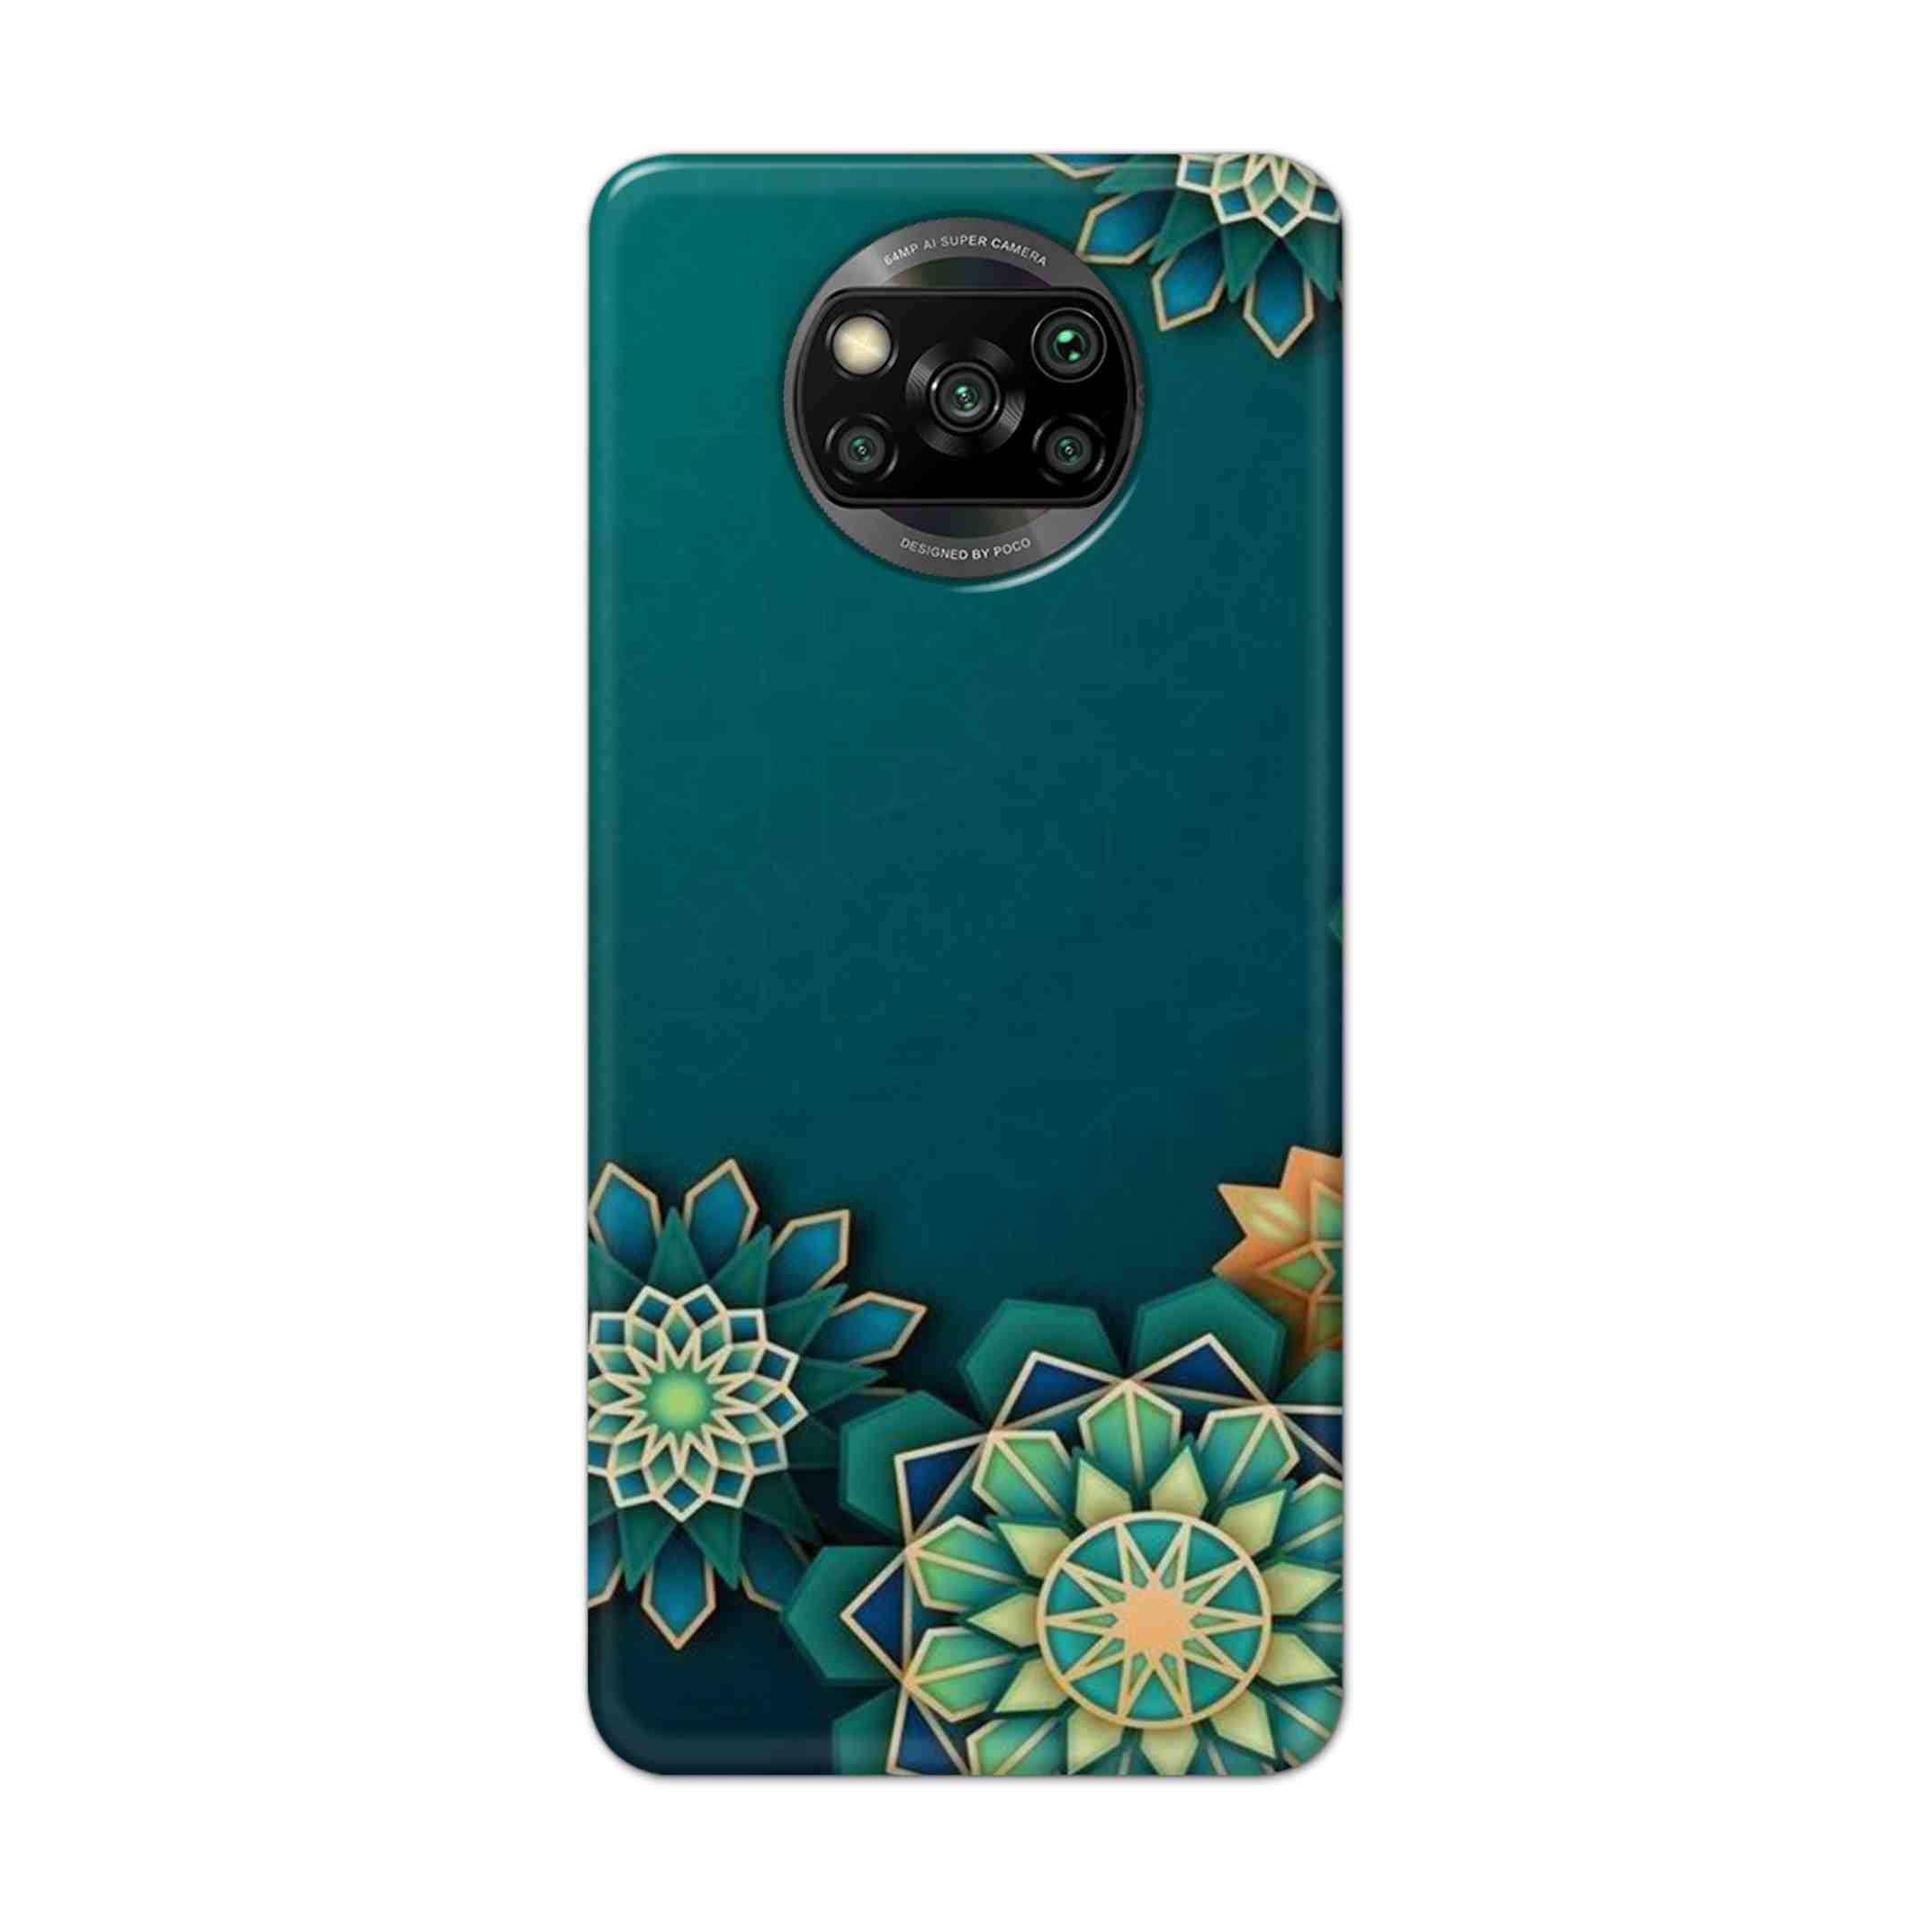 Buy Green Flower Hard Back Mobile Phone Case Cover For Pcoc X3 NFC Online